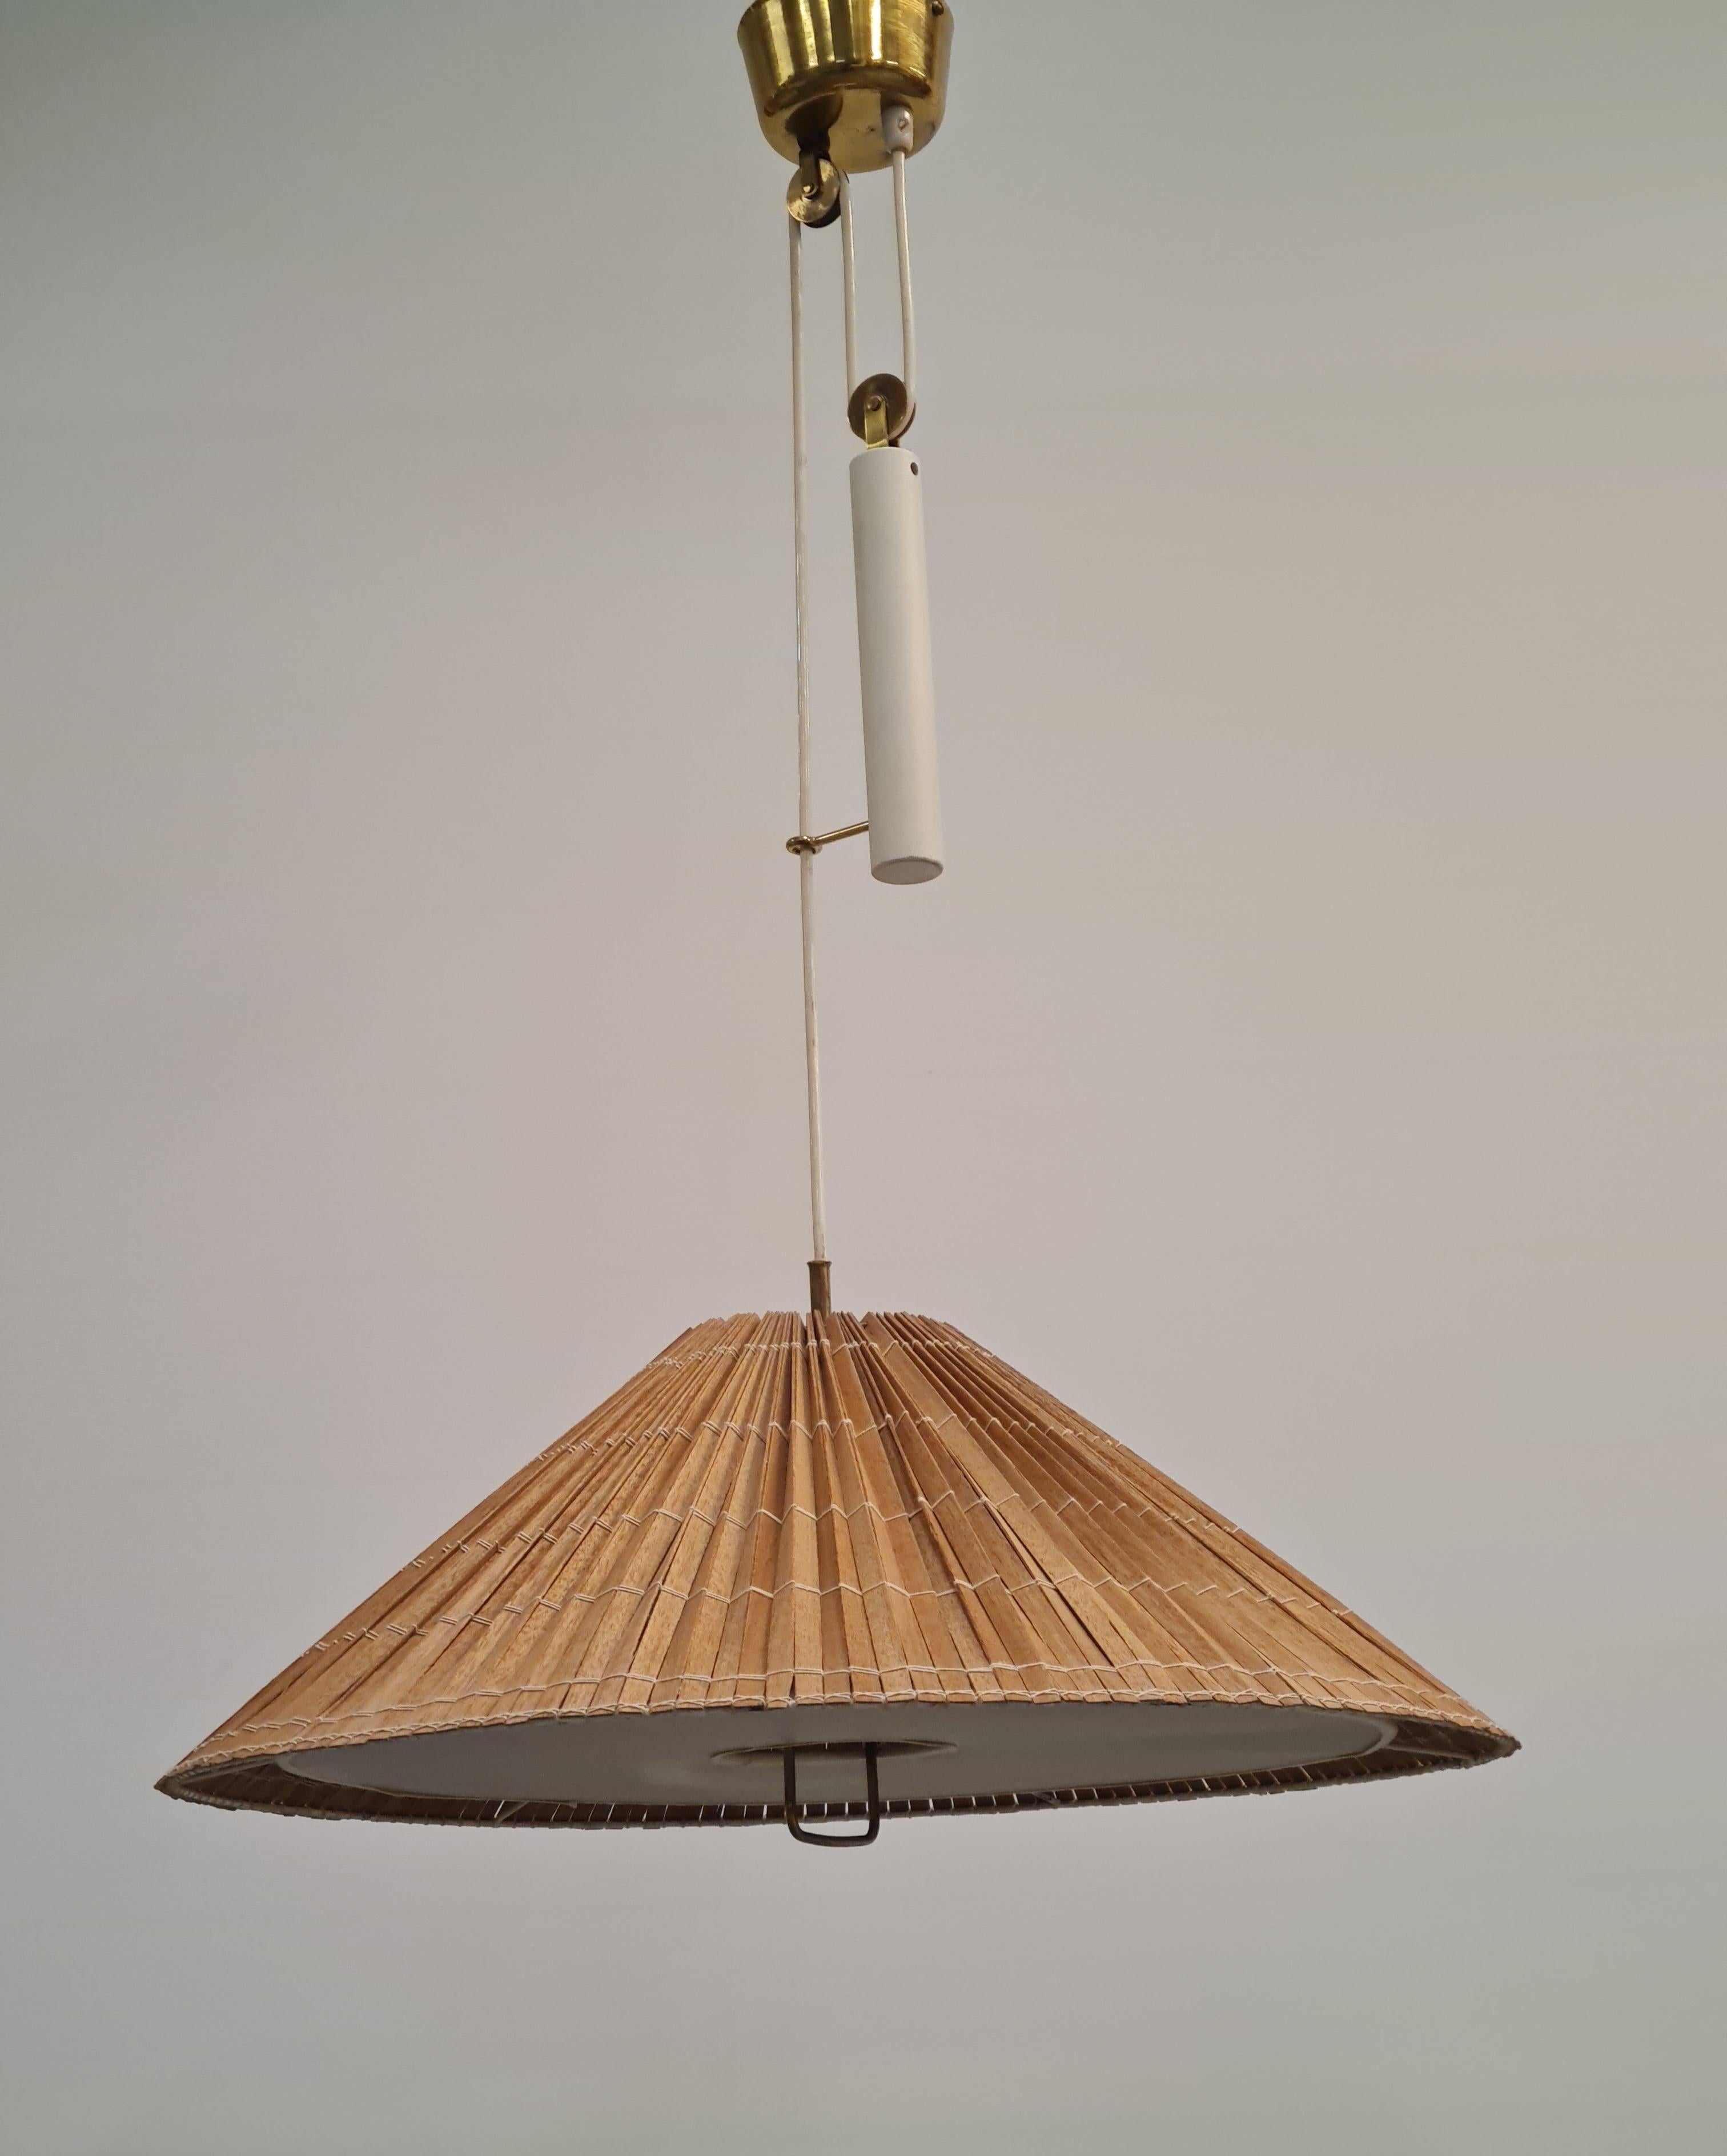 A beautiful adjustable lamp by Paavo Tynell that harmoniously combines many elements such as brass, wooden slats, plastic defuser, painted metal and the wirings. 
The lamp has all original parts except for the renewed wooden slat shade that was